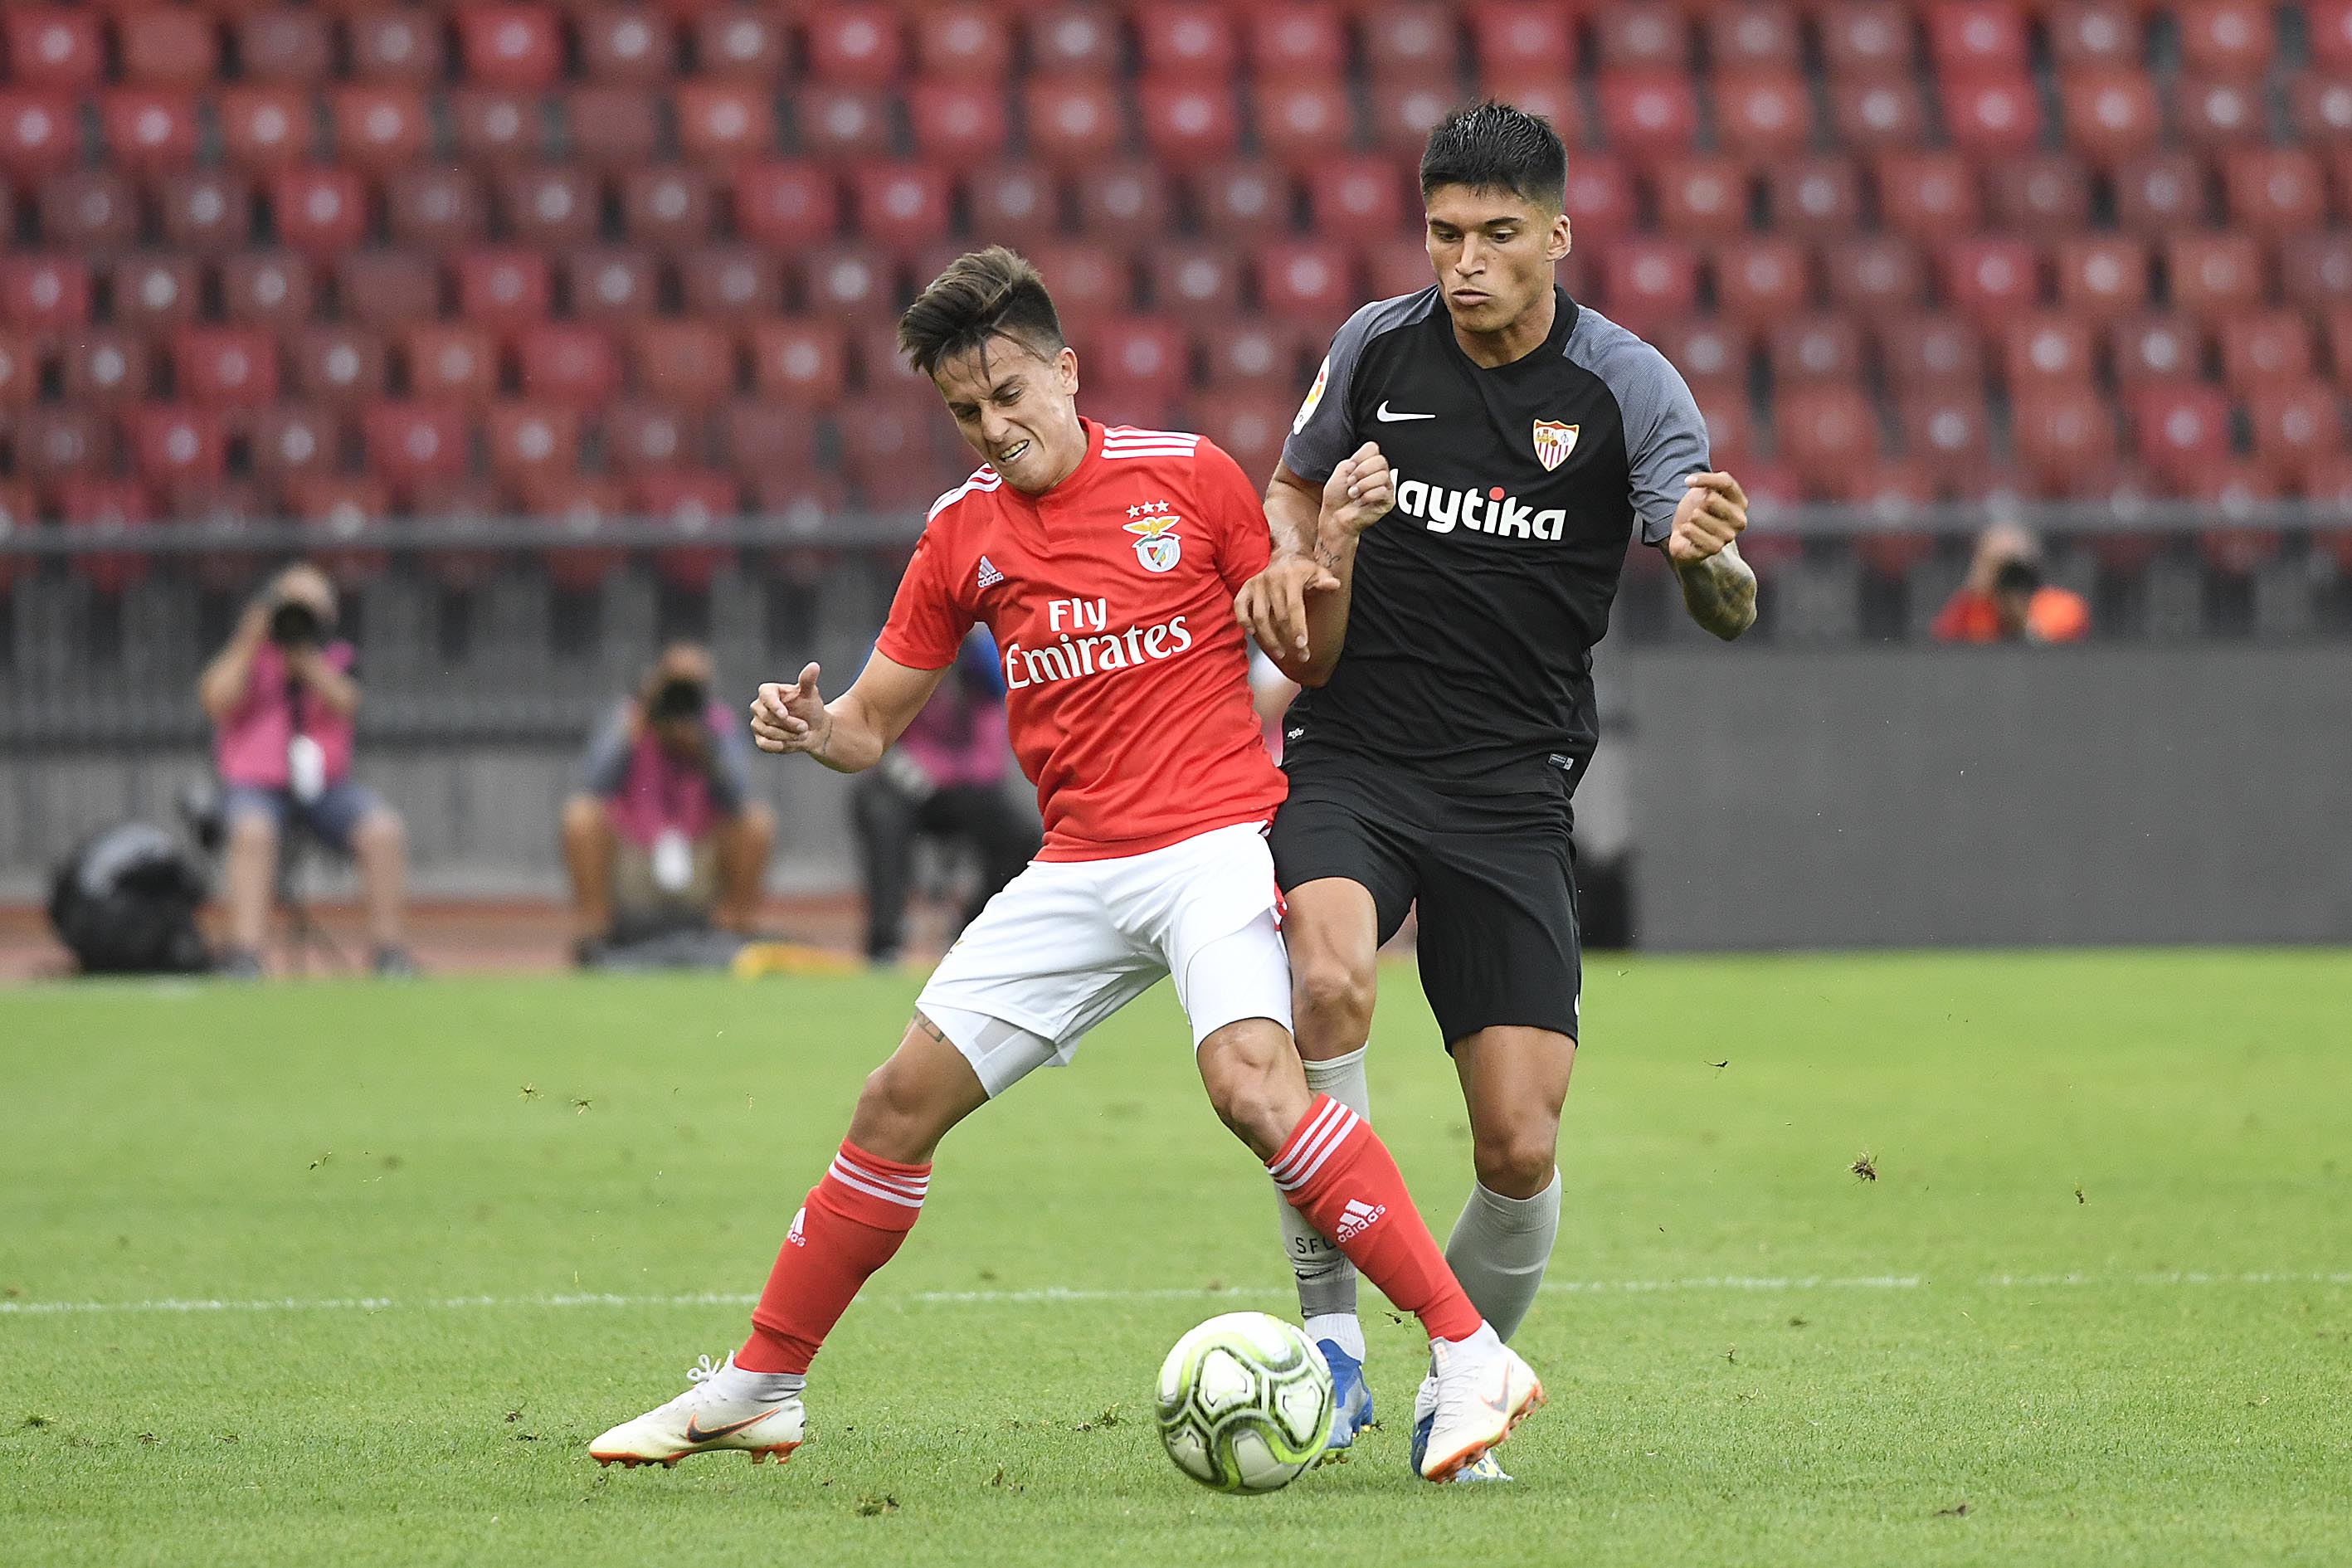 Correa playing in a friendly against Benfica